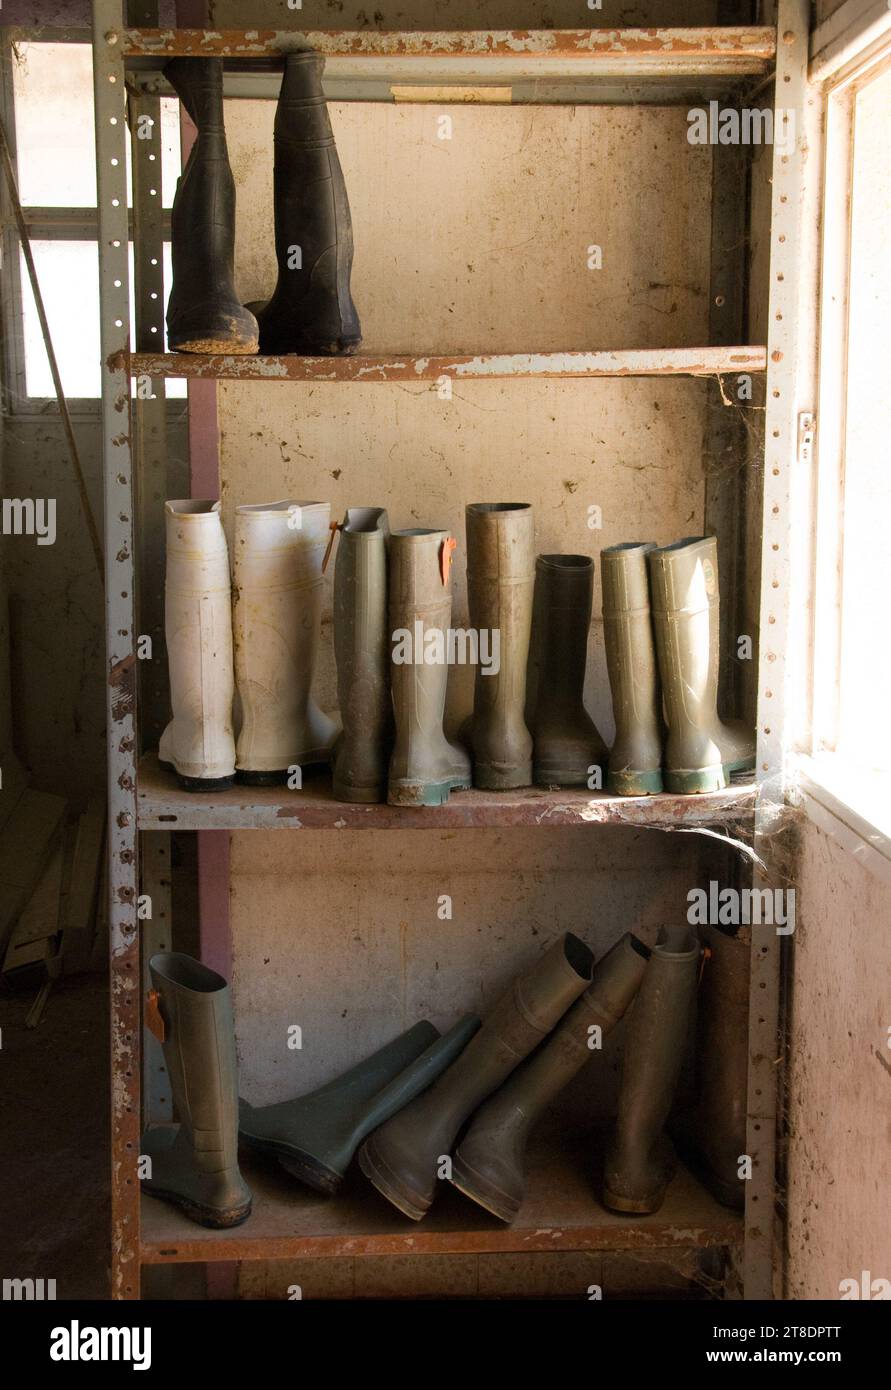 High-leg rubber boots worn by dairy farmers in a milking barn are stored on a metal shelf inside the creamery. Stock Photo